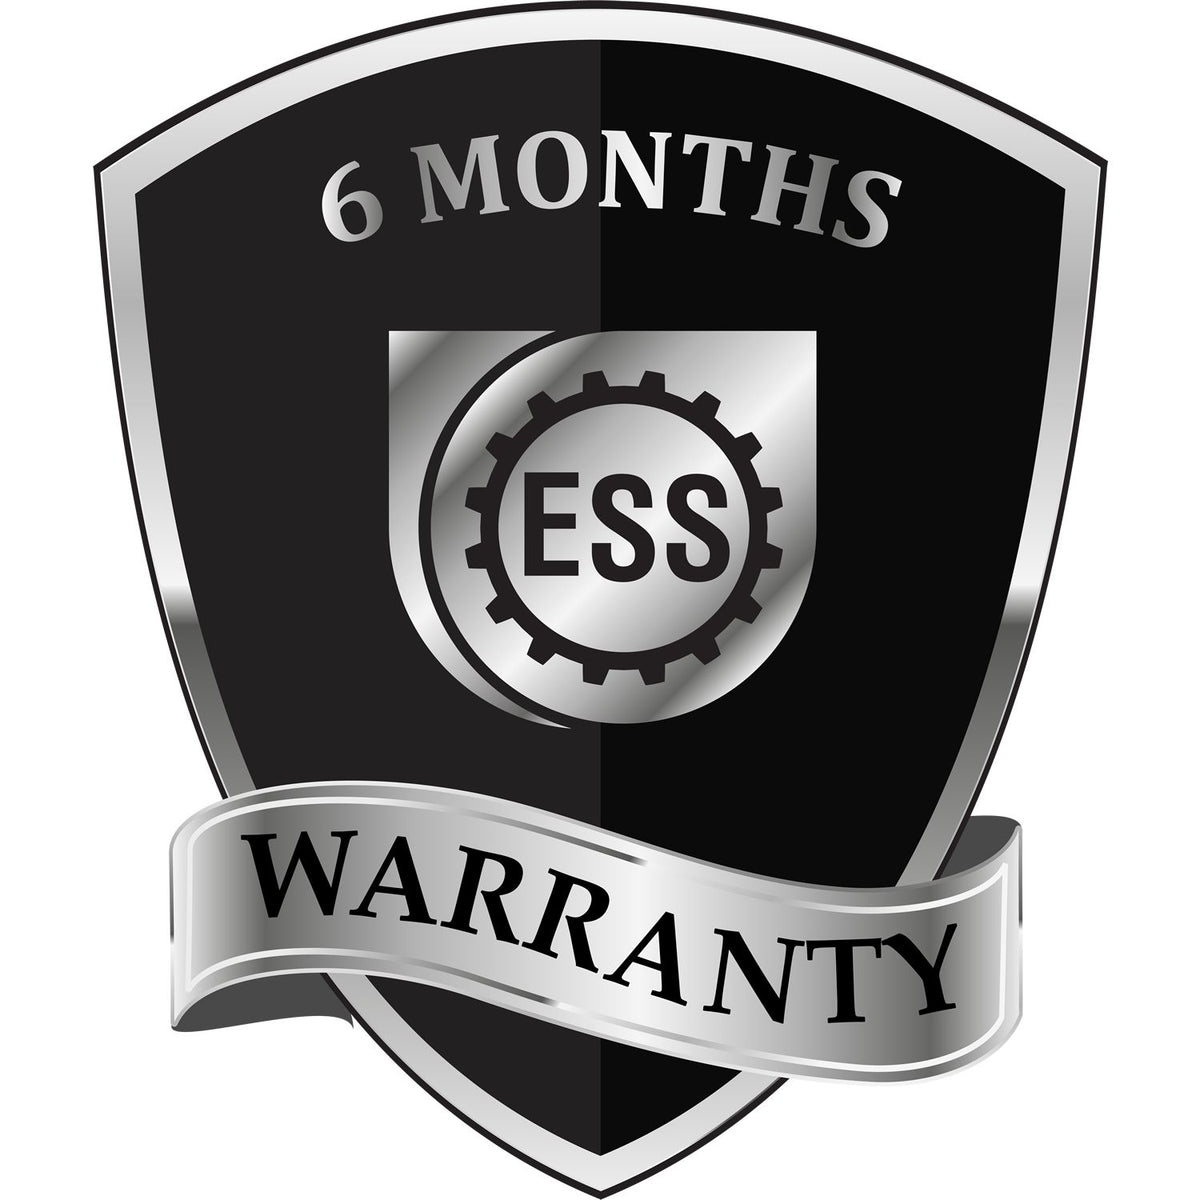 A badge or emblem showing a warranty icon for the Self-Inking Tennessee PE Stamp